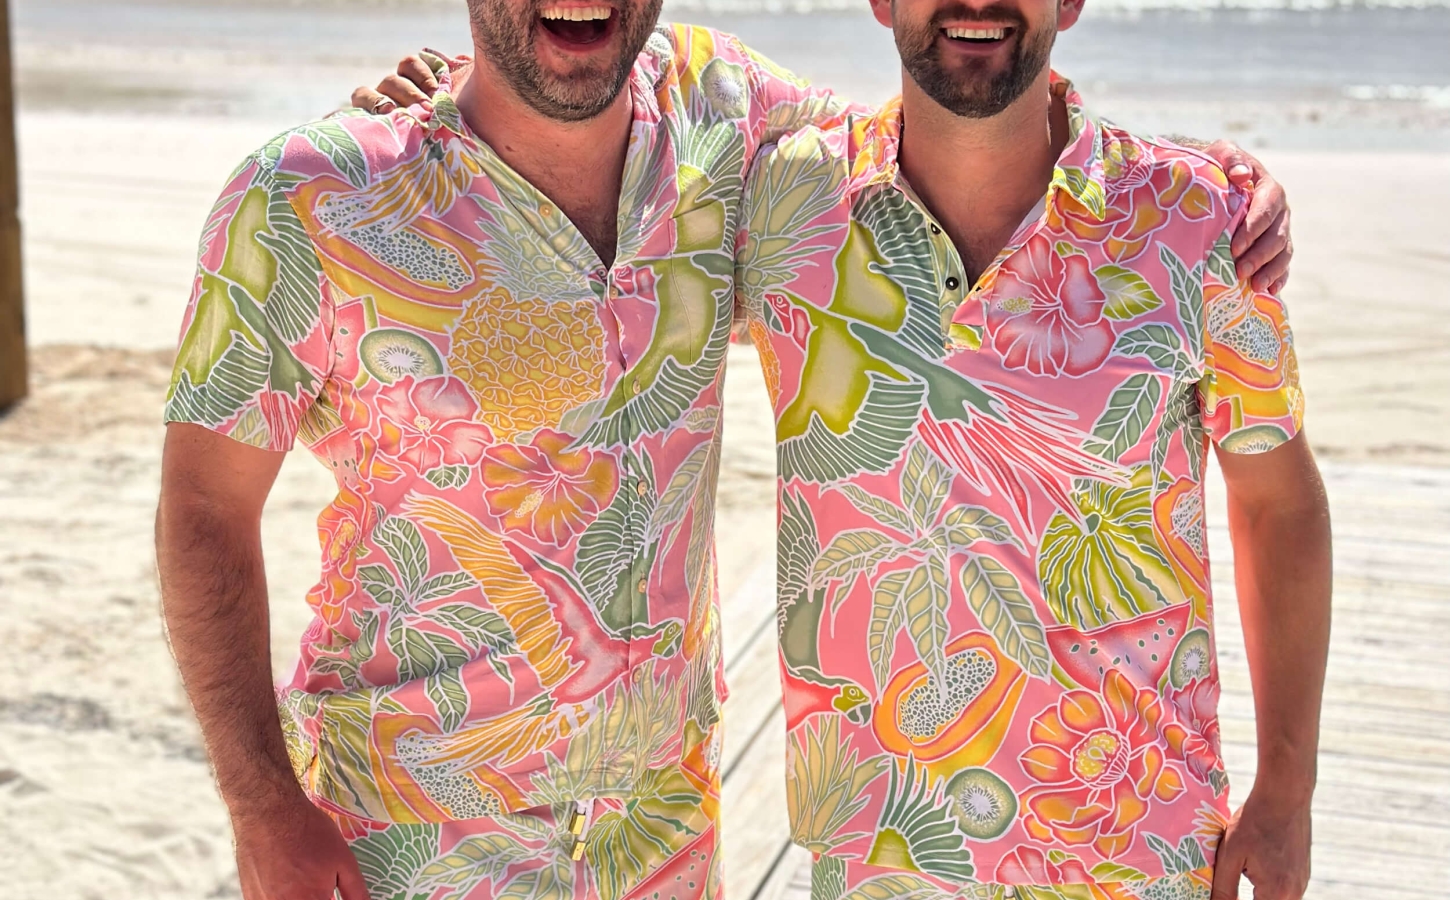 Two Abaco Club members posing and smiling with matching tropical clothes